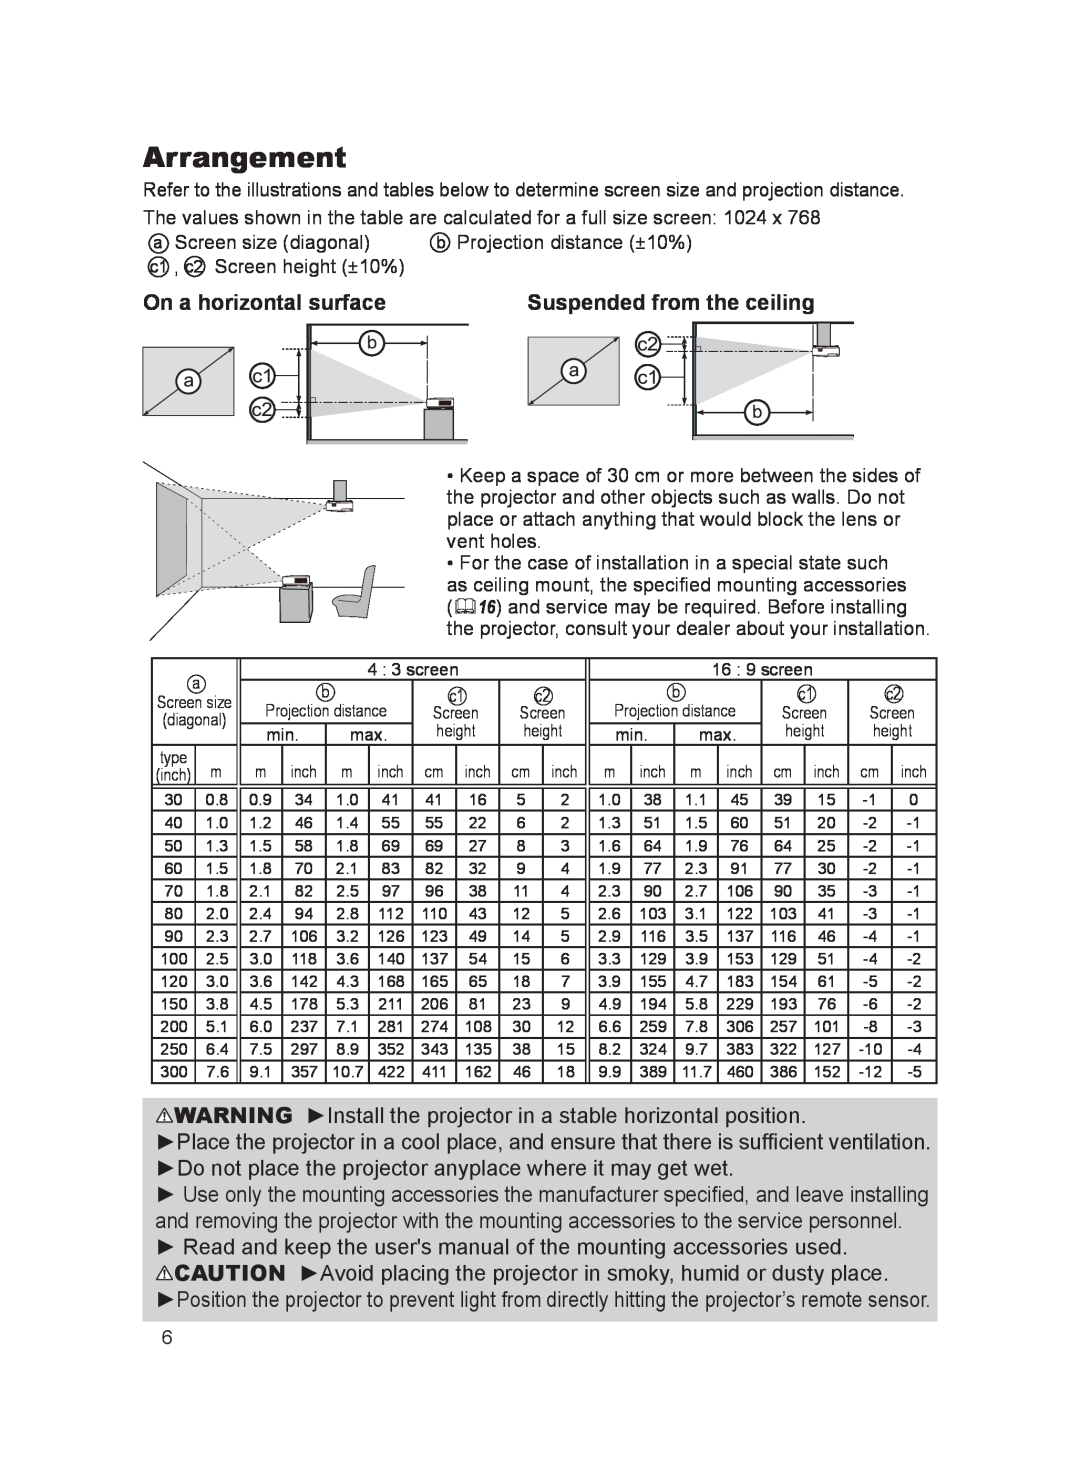 Dukane 8922H, 8923H, 8755K user manual Arrangement, On a horizontal surface, Suspended from the ceiling 